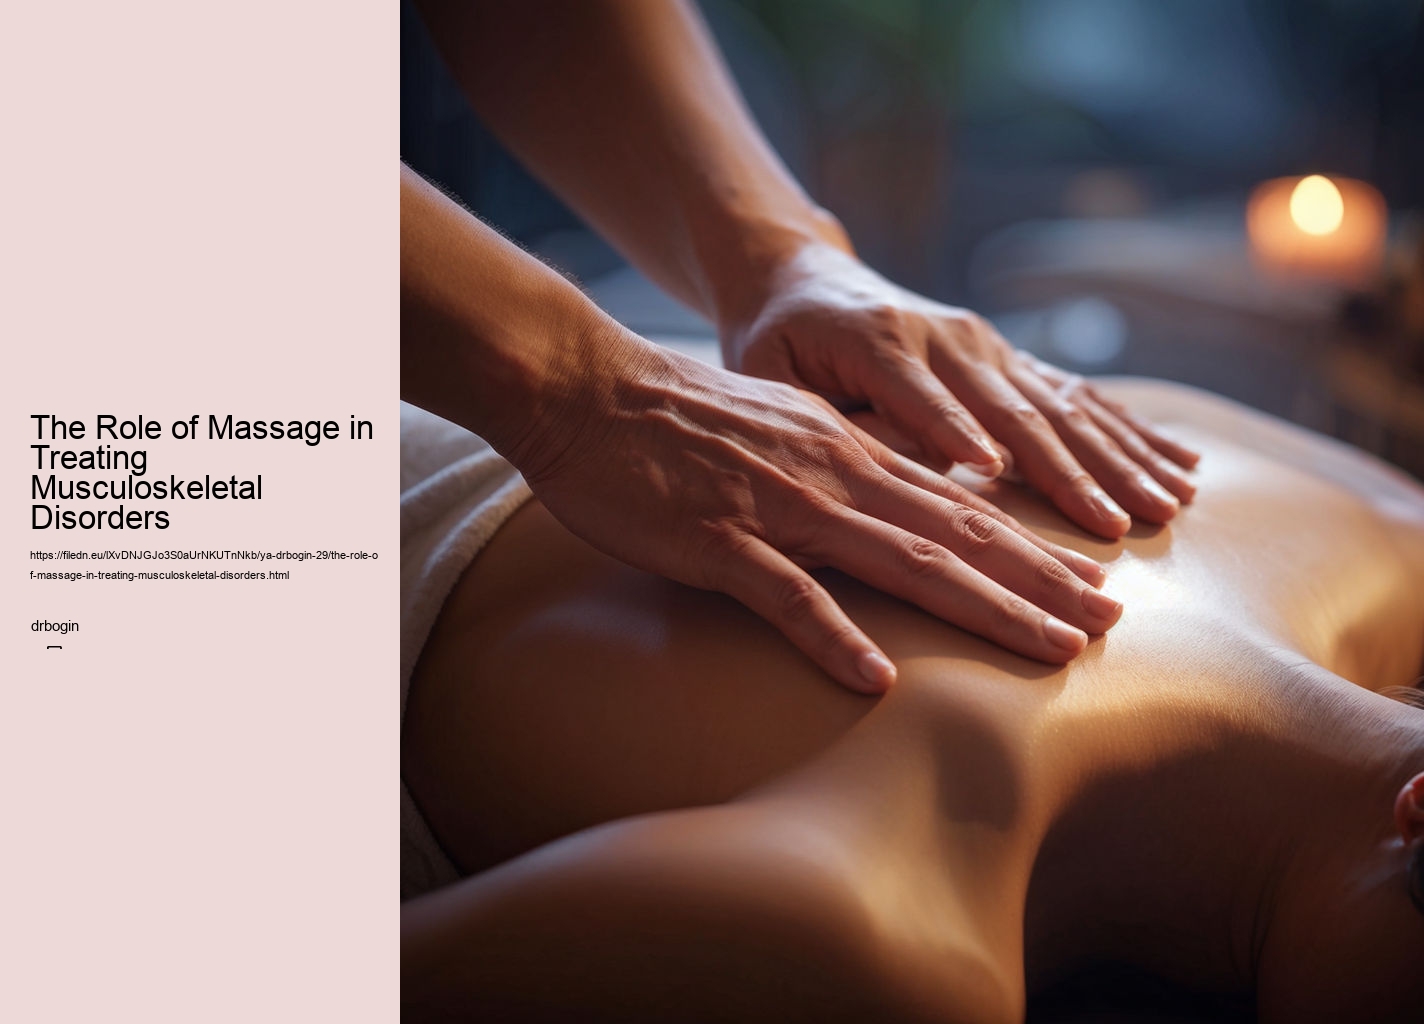 The Role of Massage in Treating Musculoskeletal Disorders